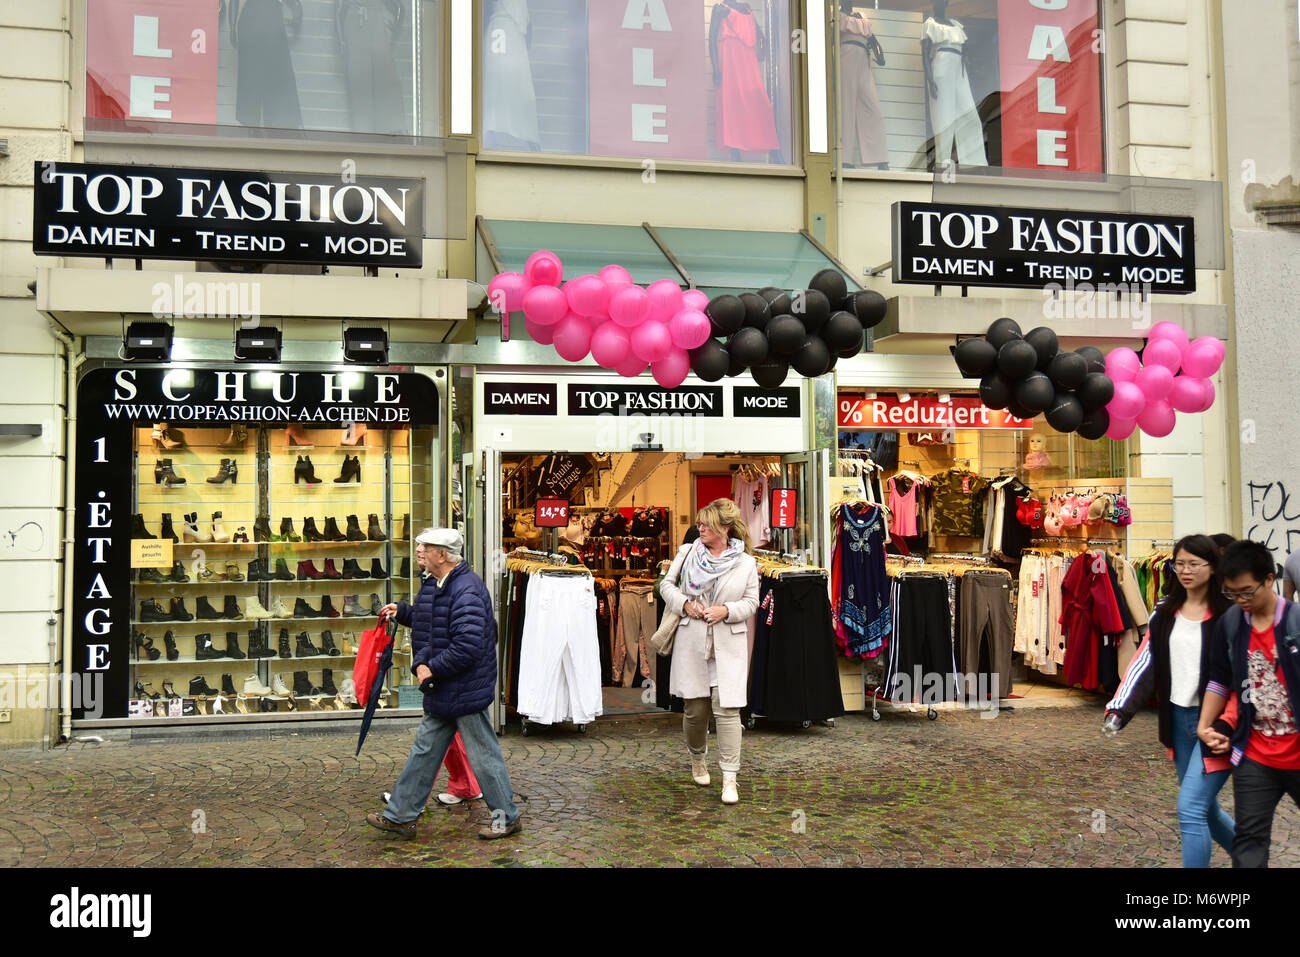 Top Fashion a clothing store in Aachen, Germany Stock Photo - Alamy